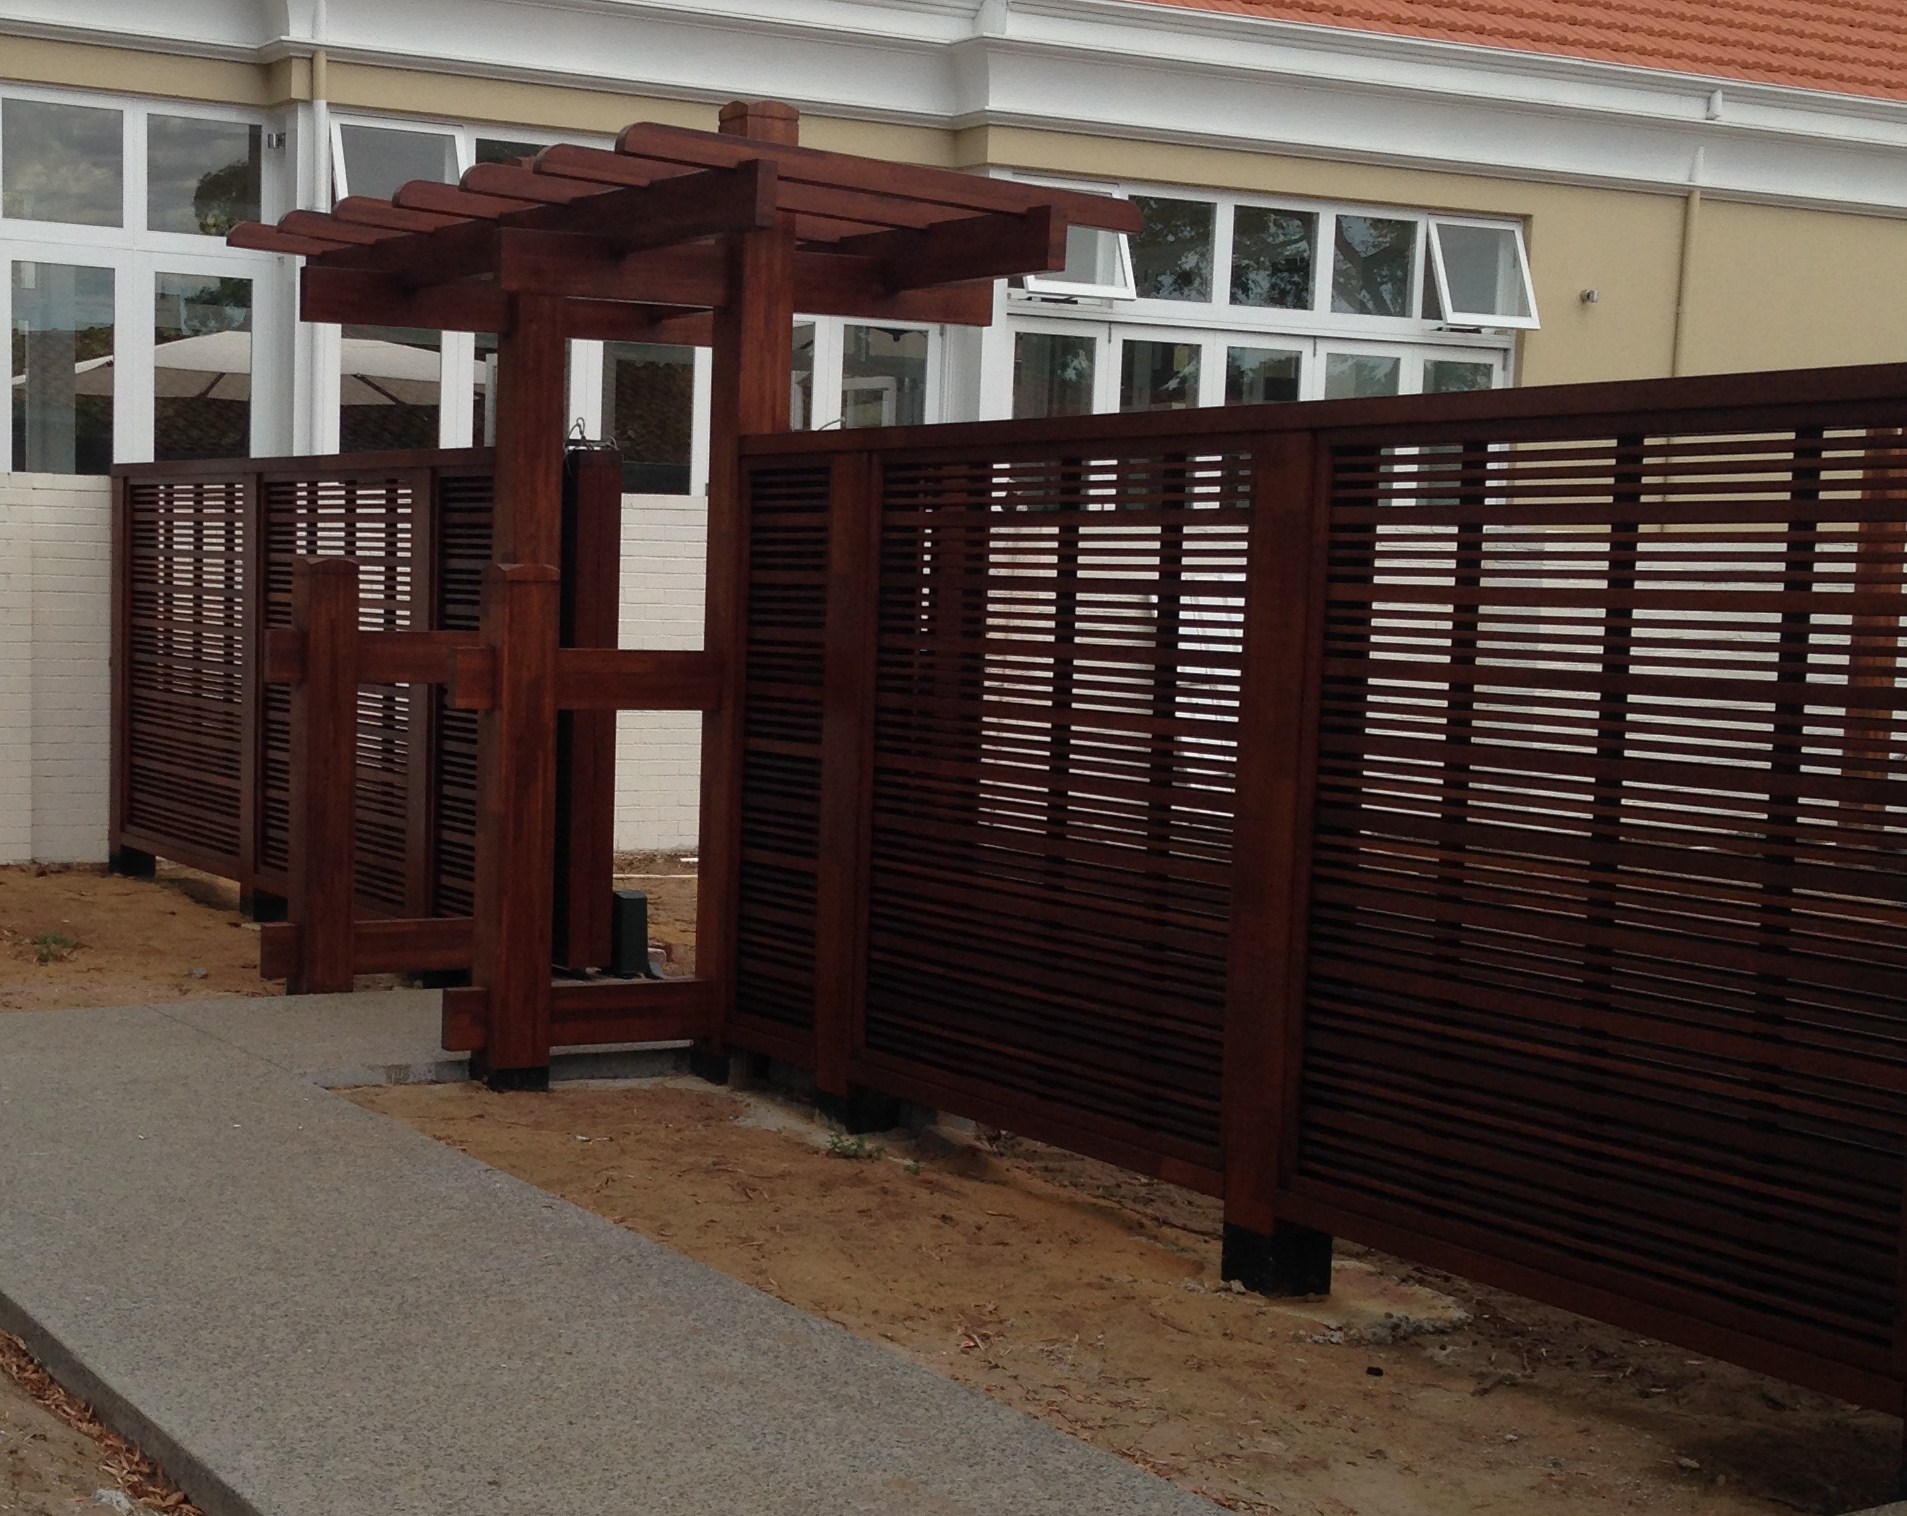 High residential fence and pergola painted in brown stain